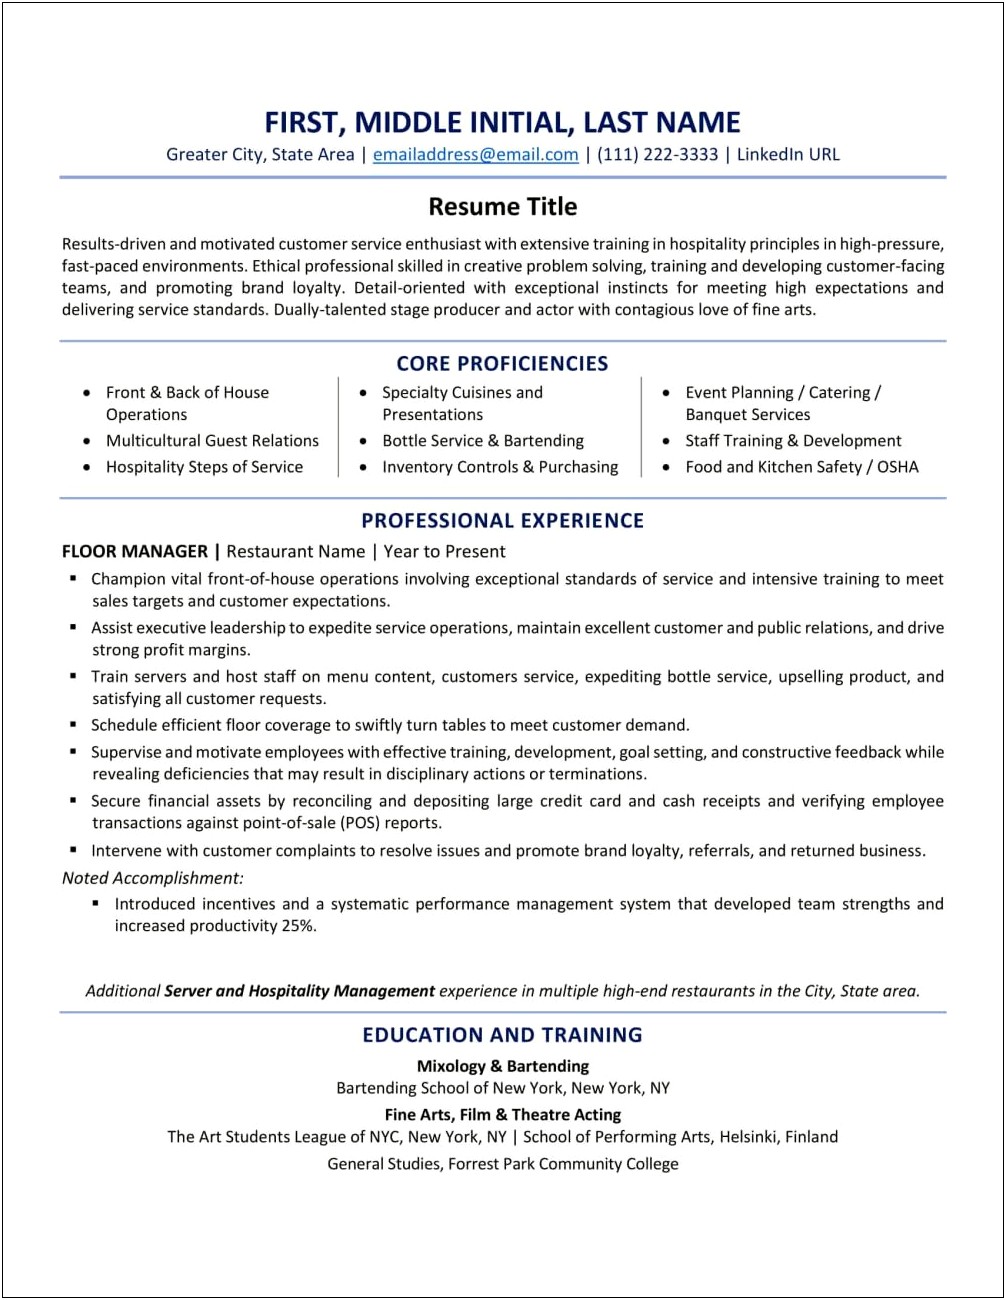 Resume Tips For 2 Years Experience